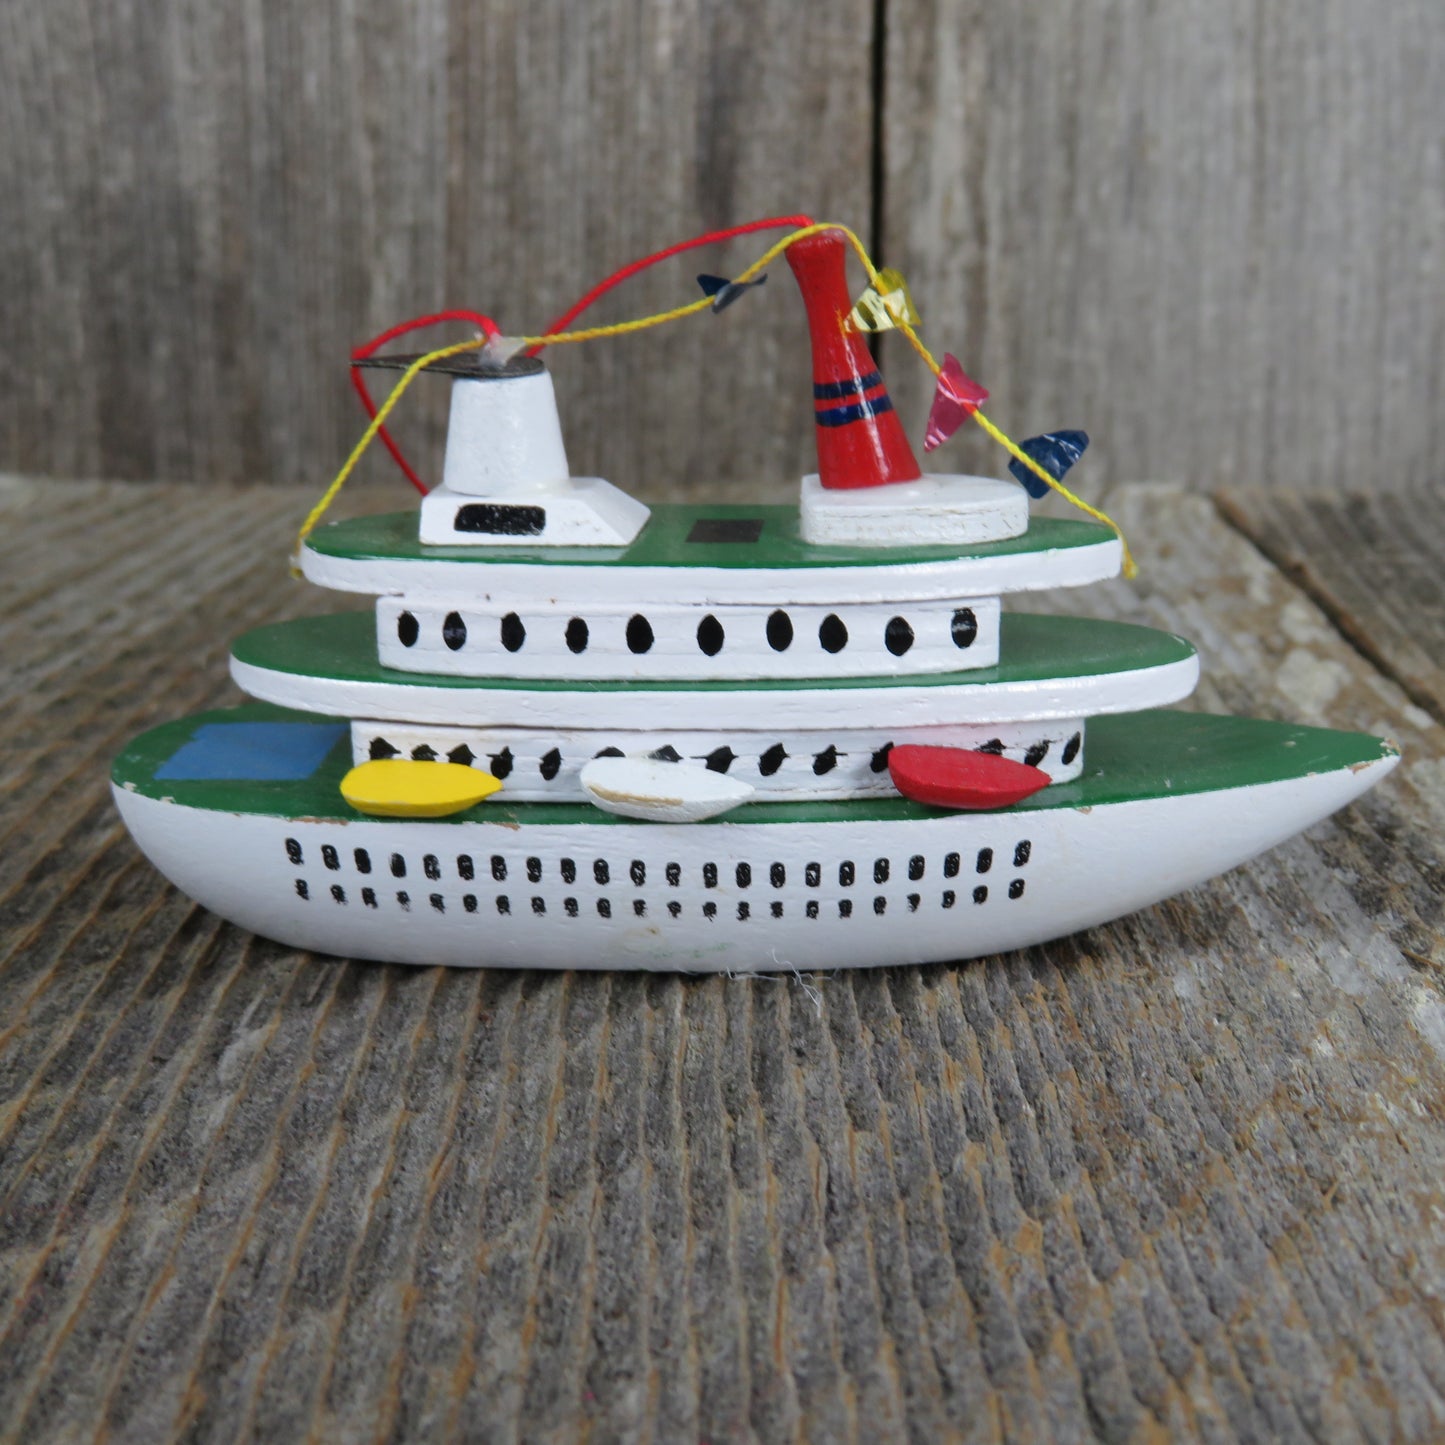 Vintage Cruise Ship Yacht Wood Ornament Wooden Boat Midwest Importers Christmas Cannon Falls Taiwan - At Grandma's Table